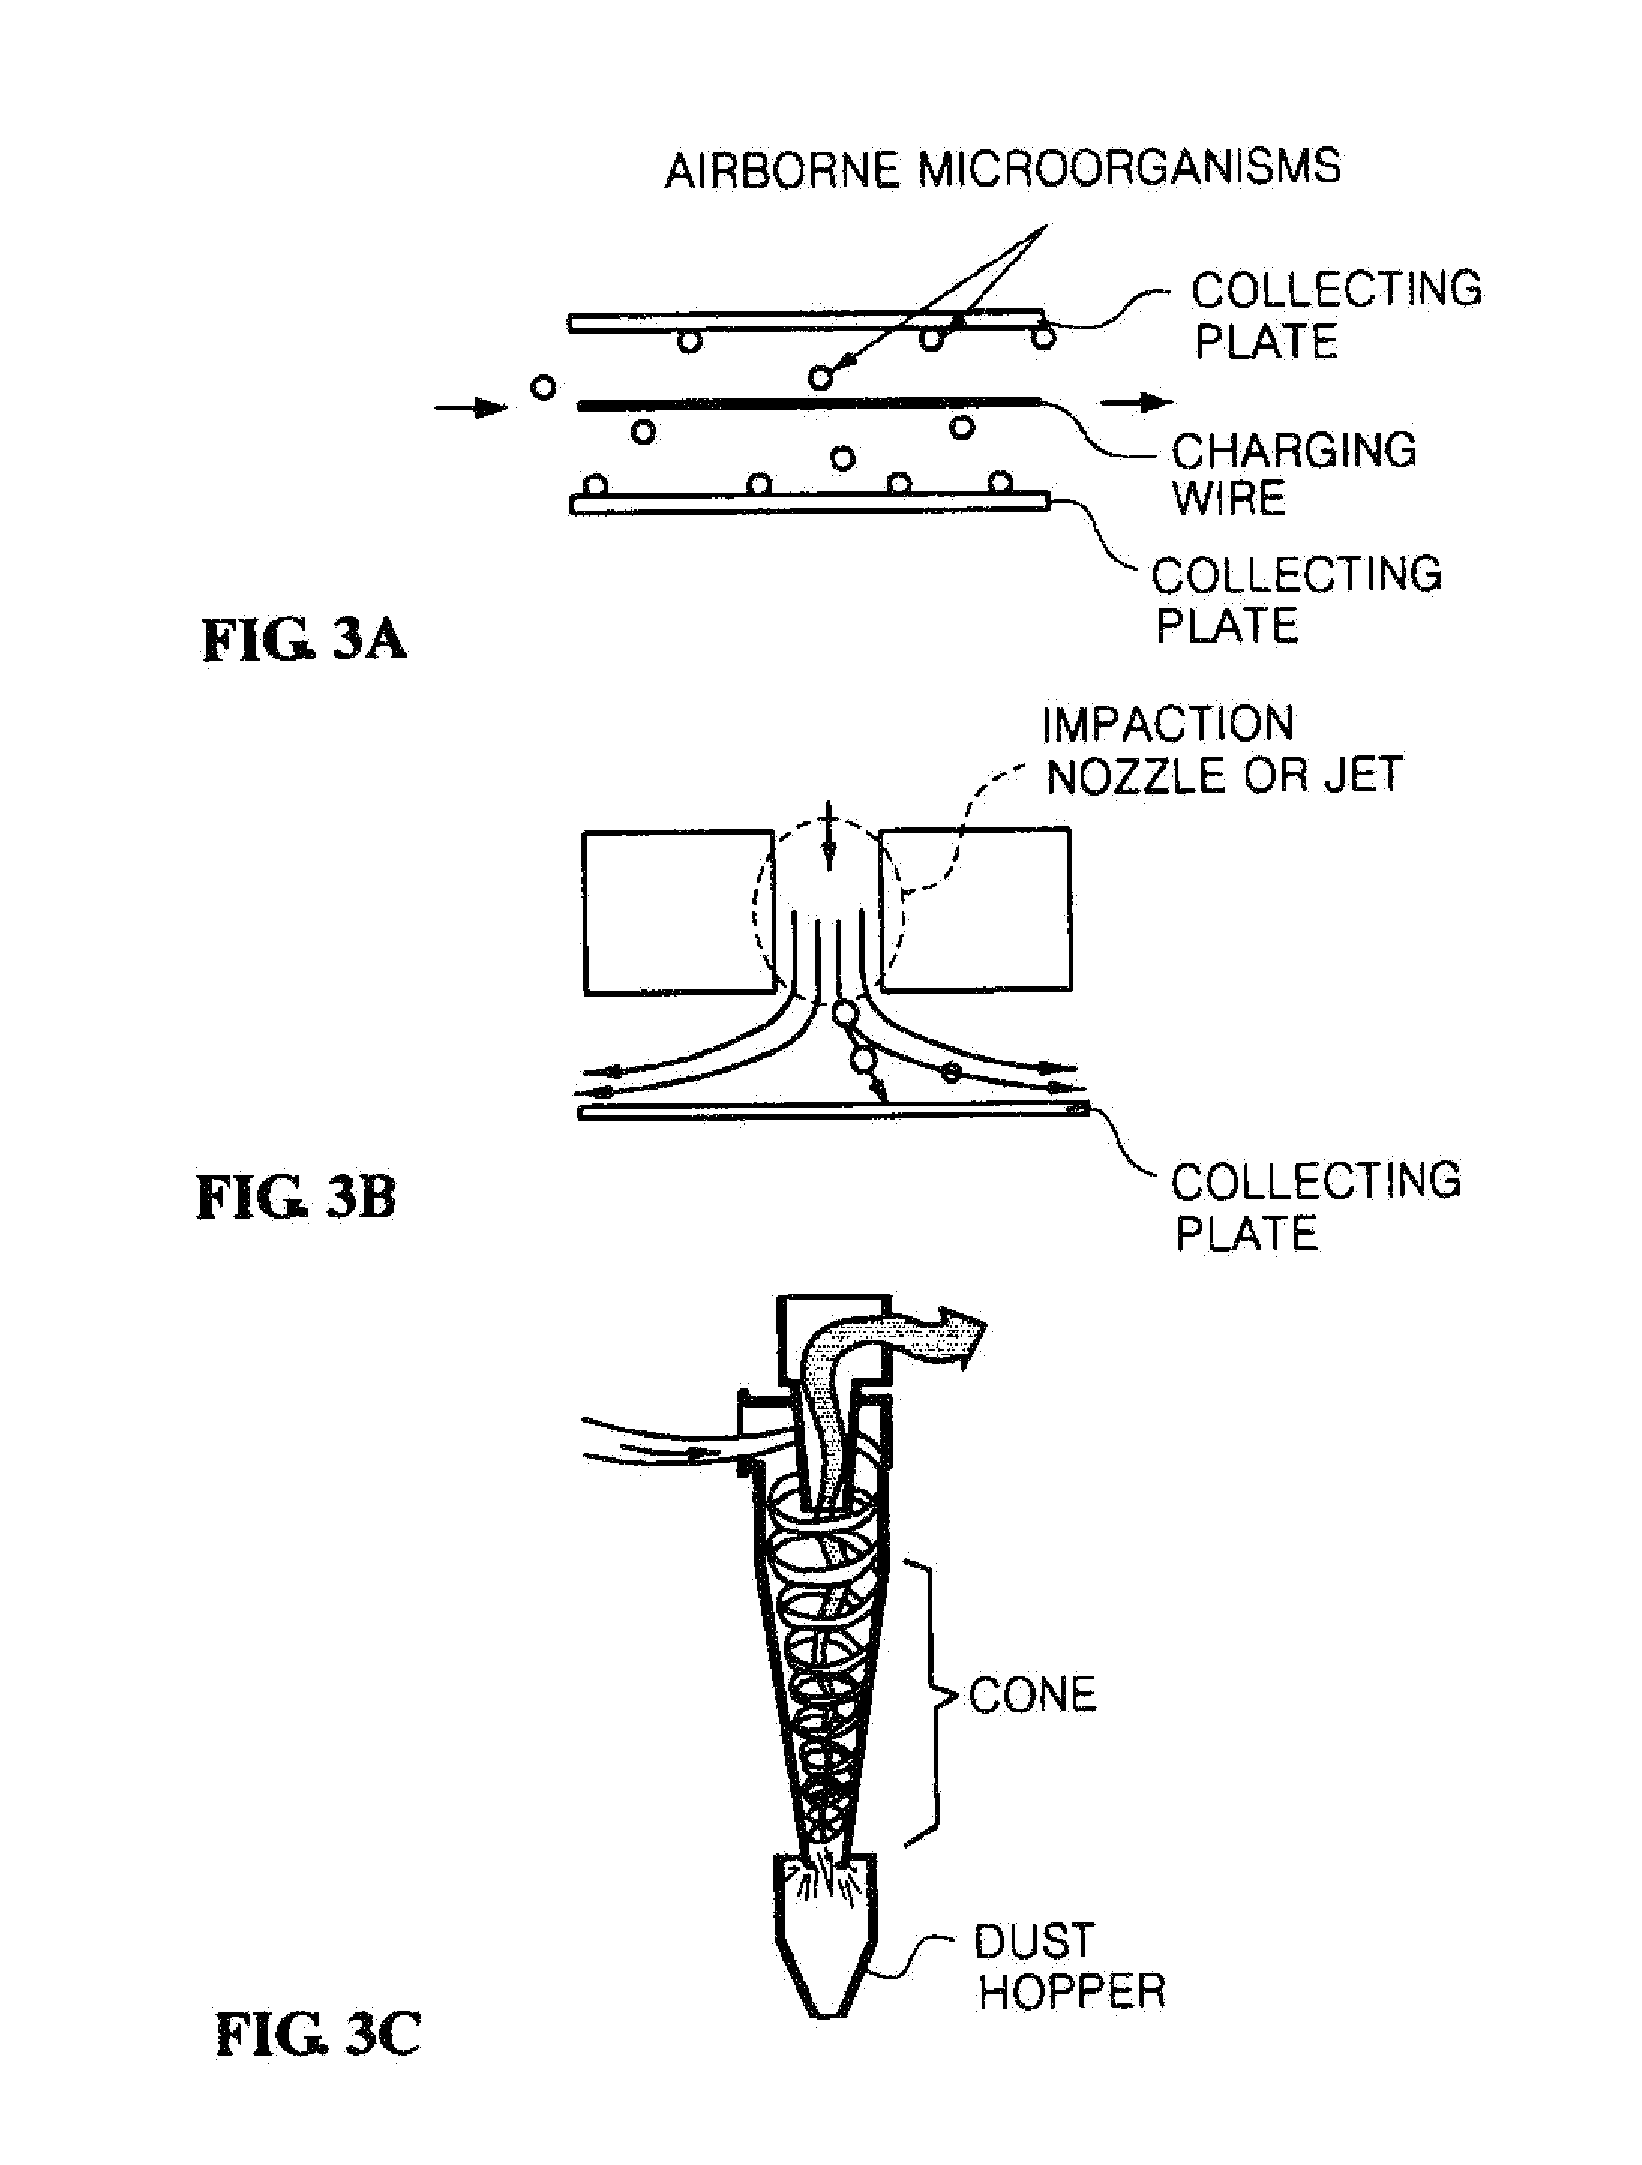 Apparatus for measuring floating microorganisms in a gas phase in real time using a system for dissolving microorganisms and ATP illumination, and method for detecting same